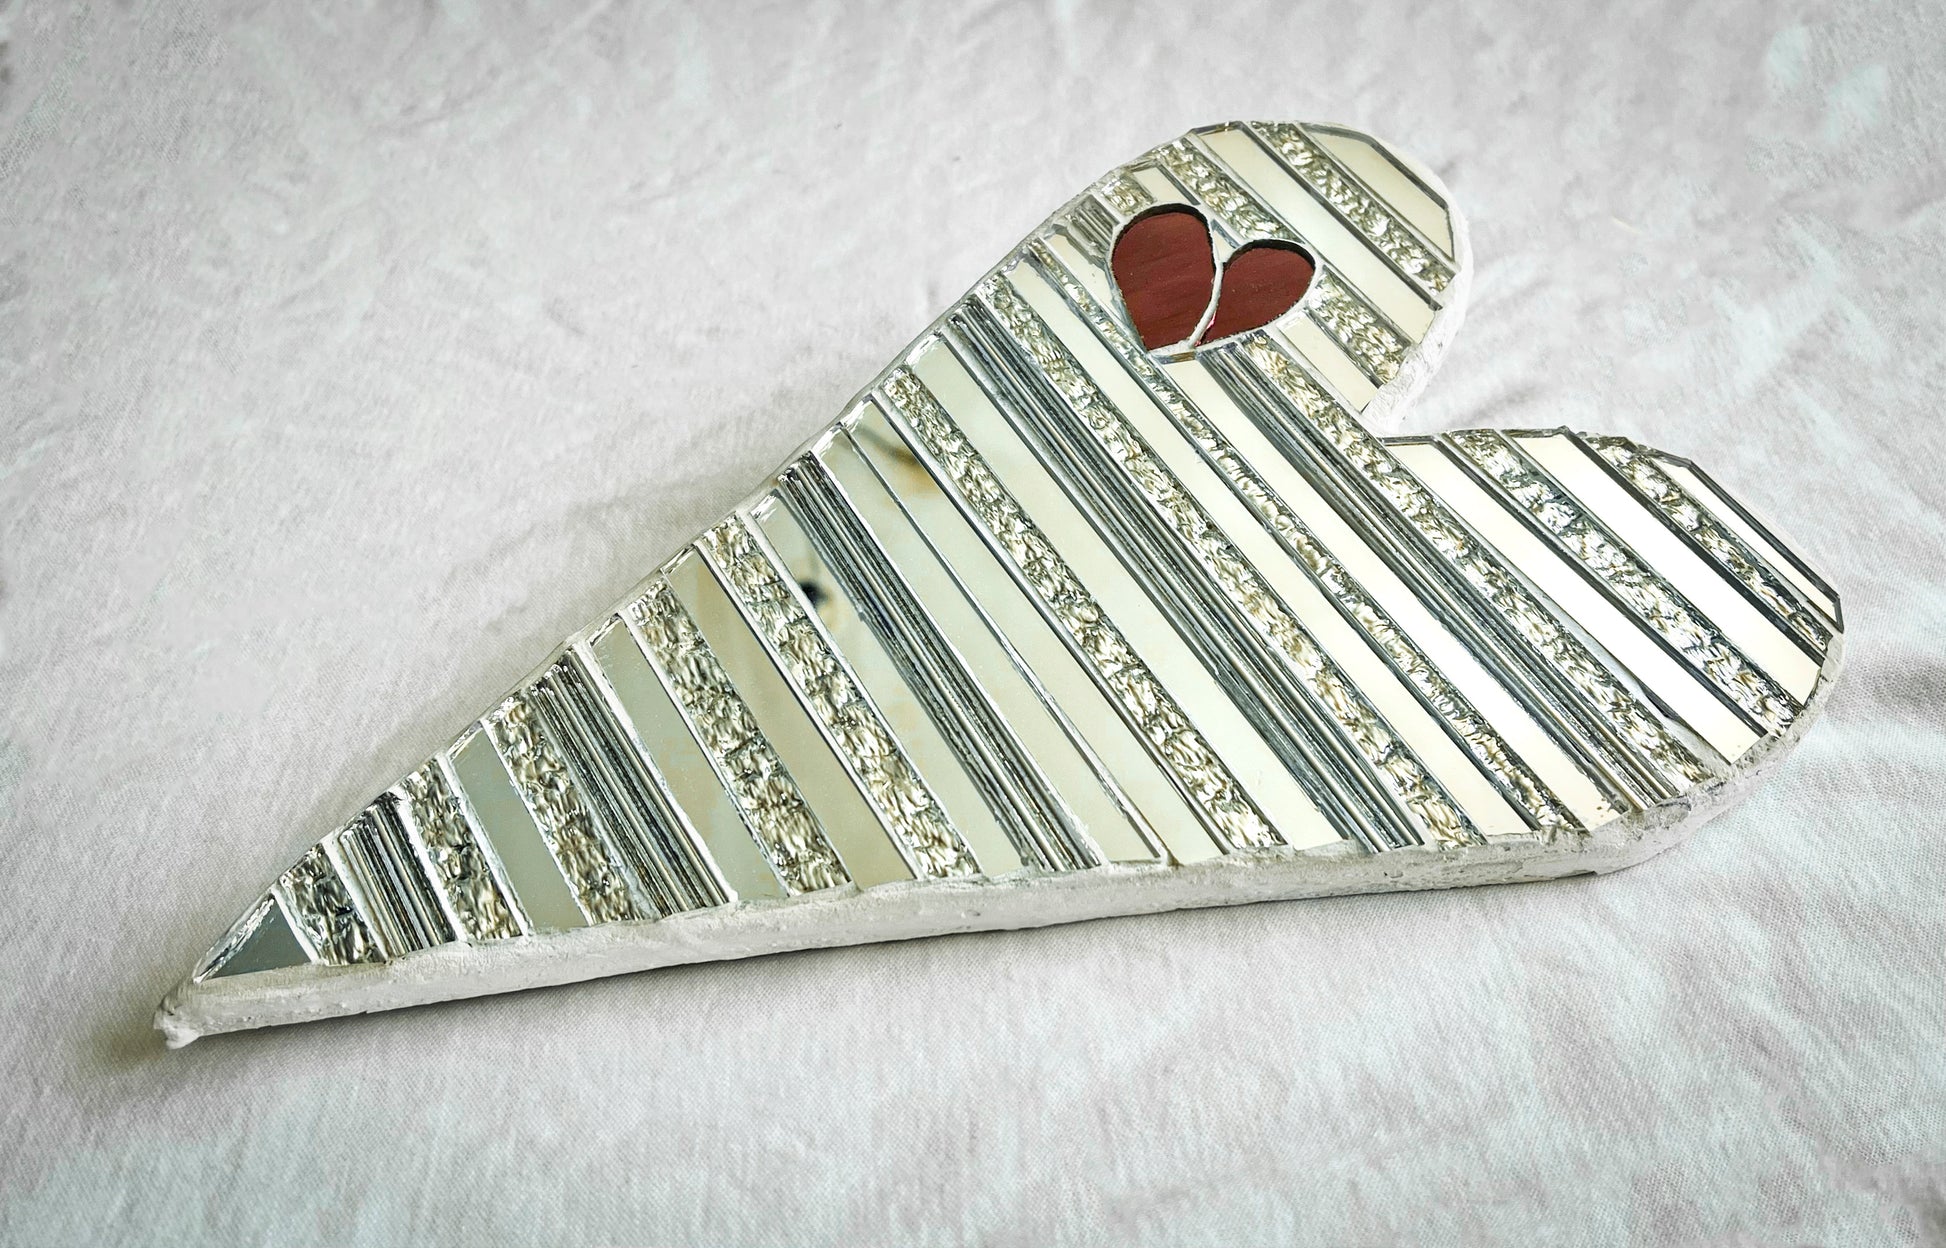 Heart-shaped mosaic made of mirrored-glass pieces with red mirror heart shape inside by Denise Marshall - title 'Hearts to You!'